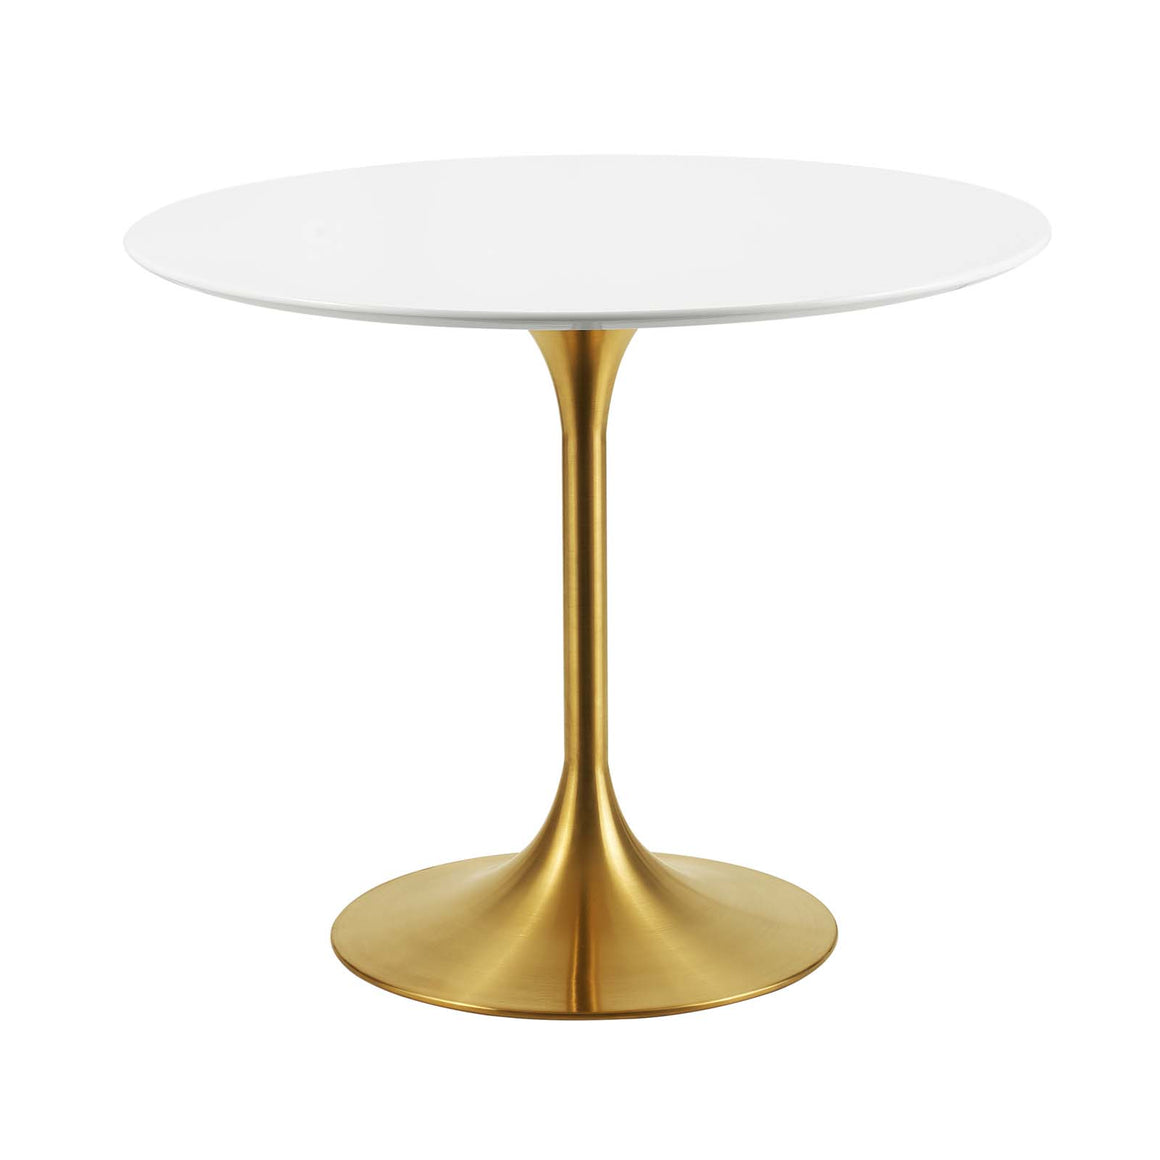 Lippa 36" Round Dining Table in  Gold White